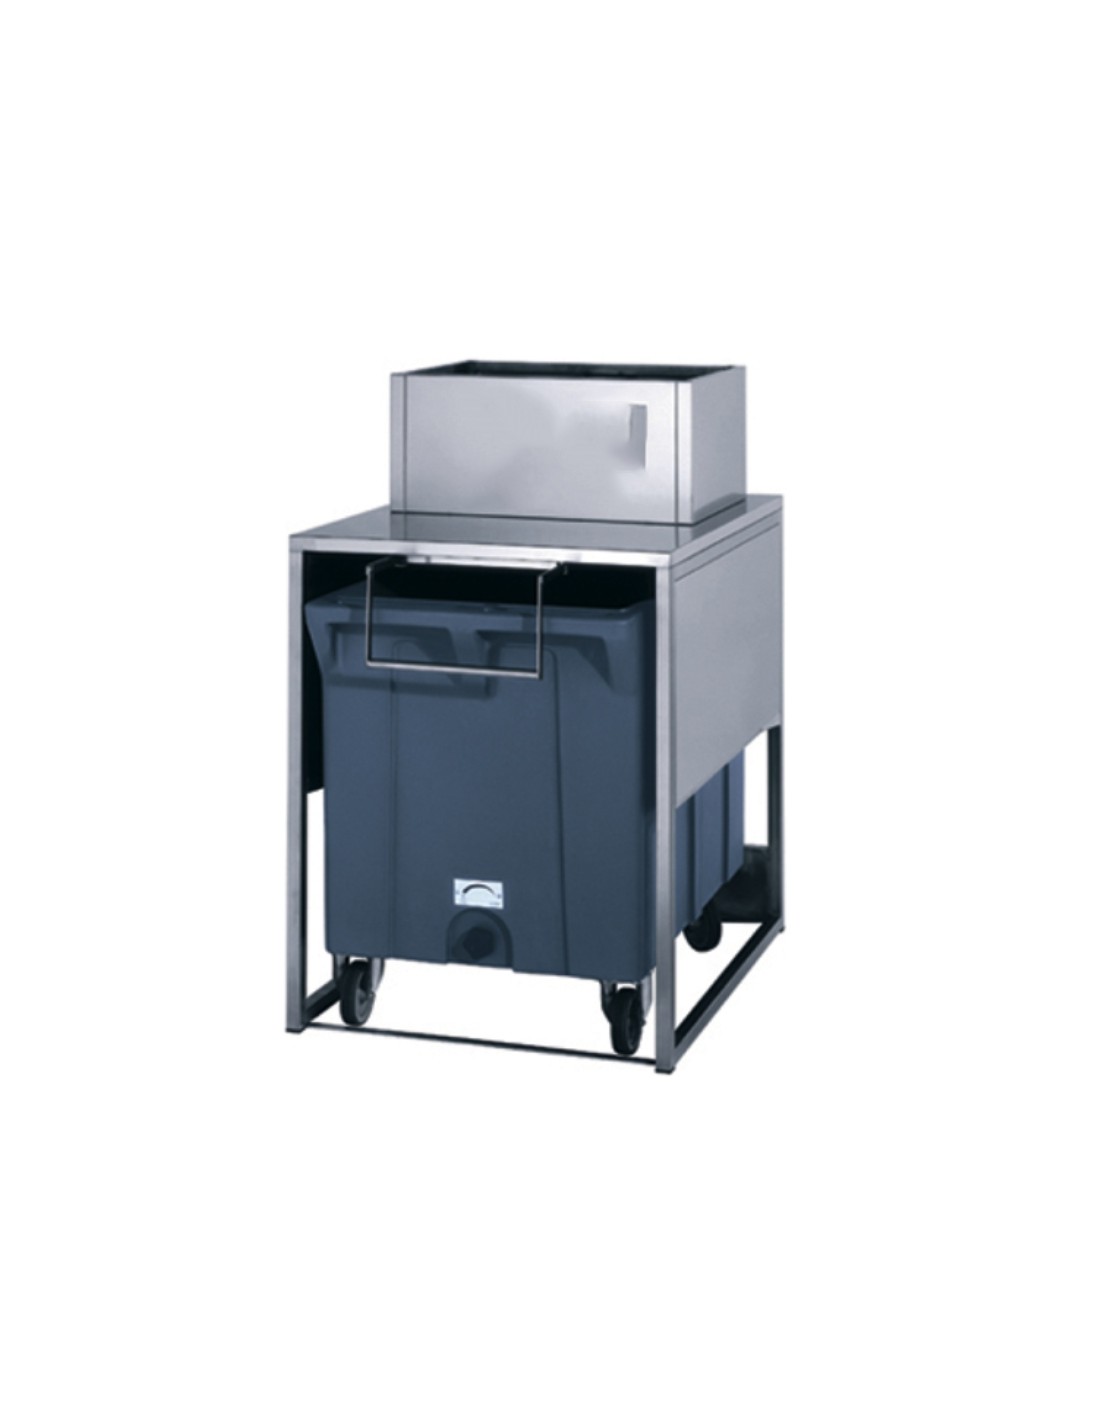 Ice container - Container capacity Kg 108 - Reserve Kg 17 - Dimensions cm 79.5 x 106 x 128.4 h